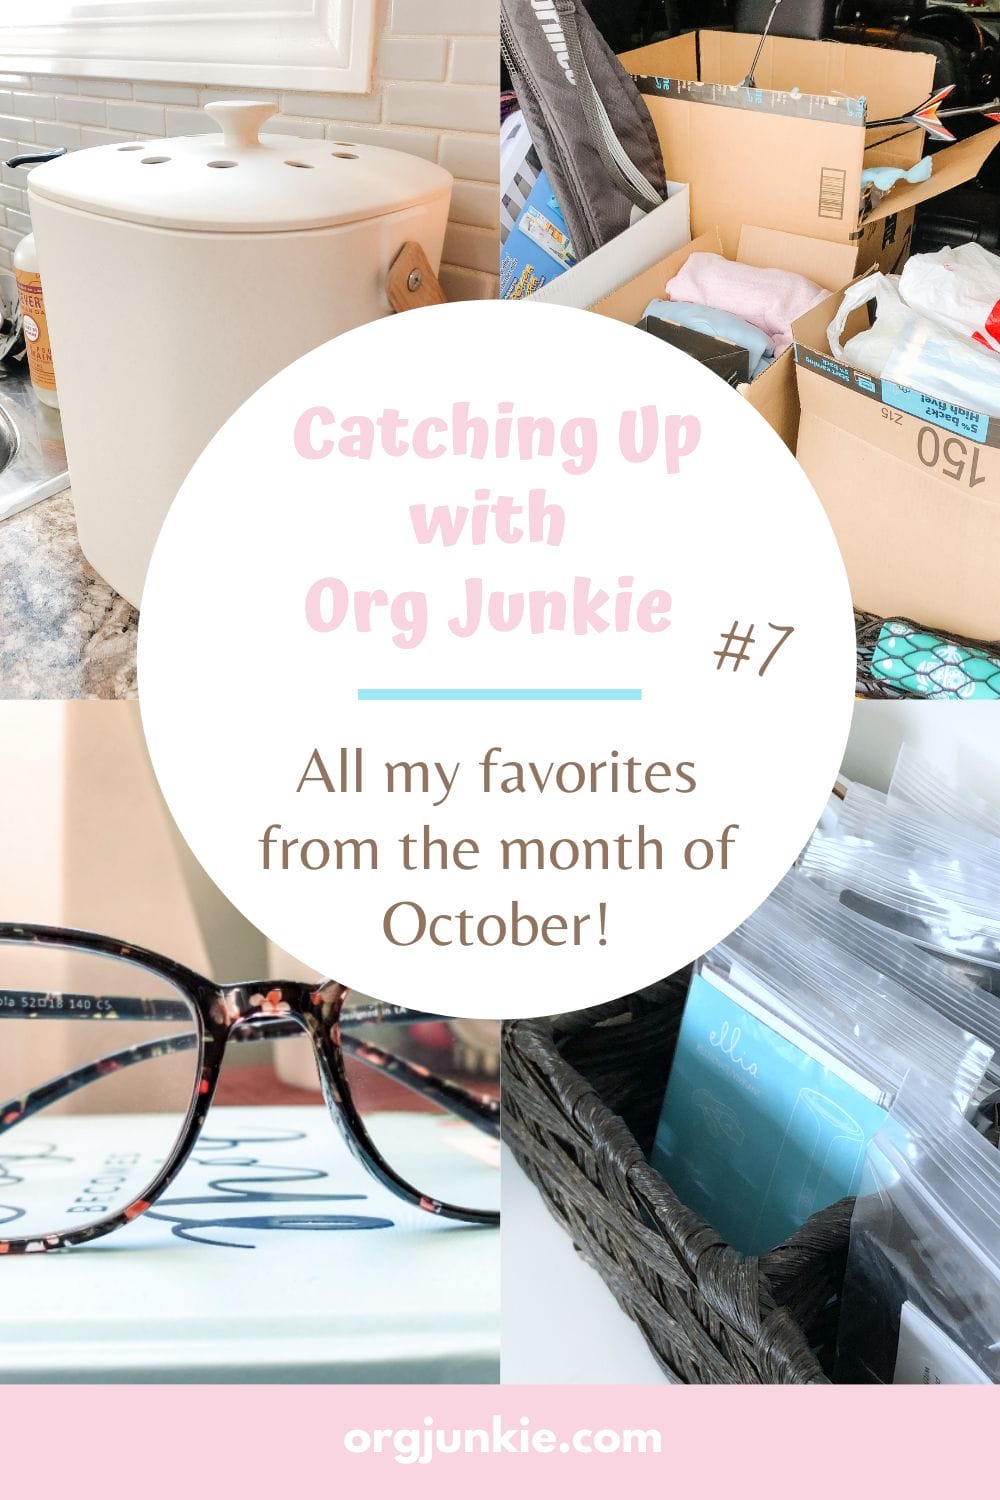 Catching Up with Org Junkie #7 ~ October 2020 Favorites: Bamboozle, Brownies & Parenthood at I'm an Organizing Junkie blog